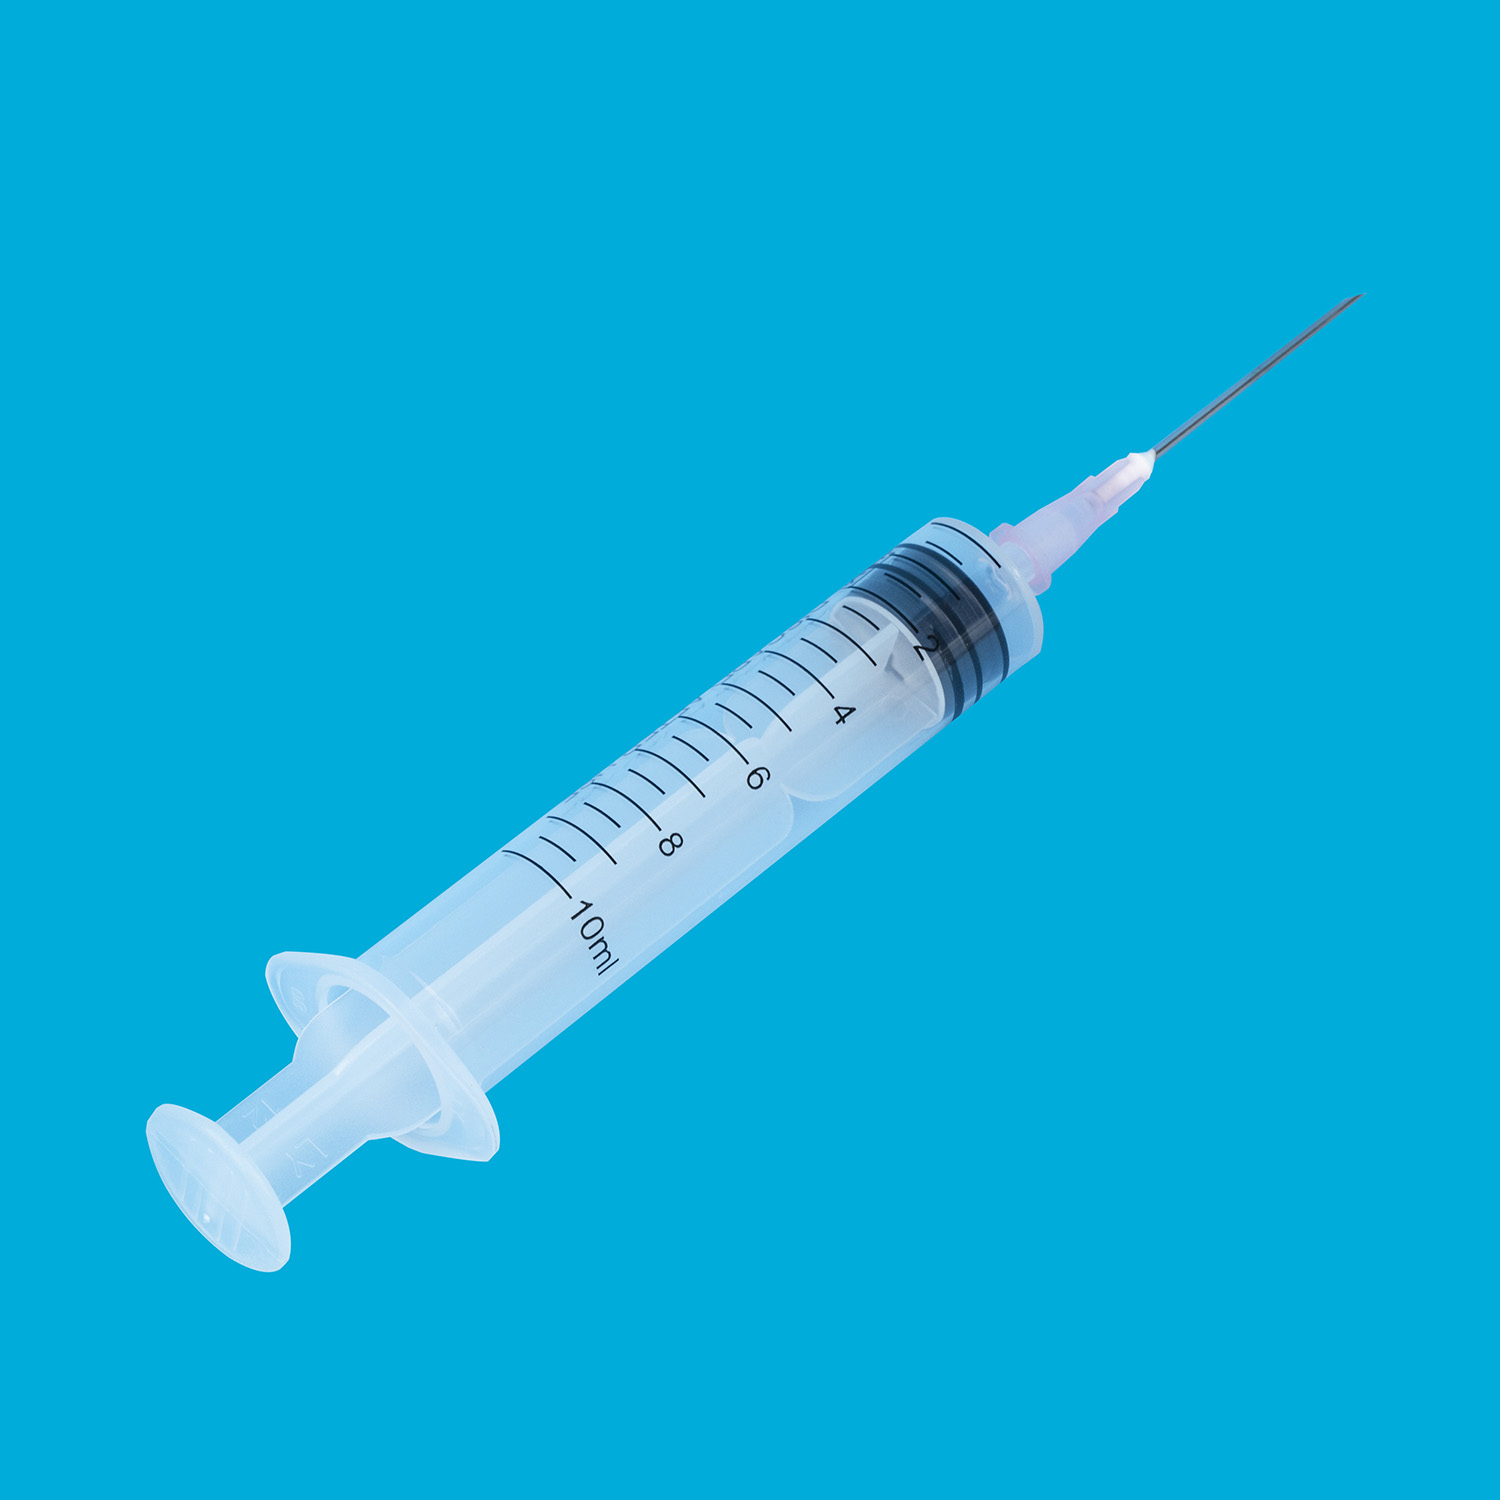 10 ml syringe - 10ml - Changzhou Medical Appliances General Factory -  disposable / sterile